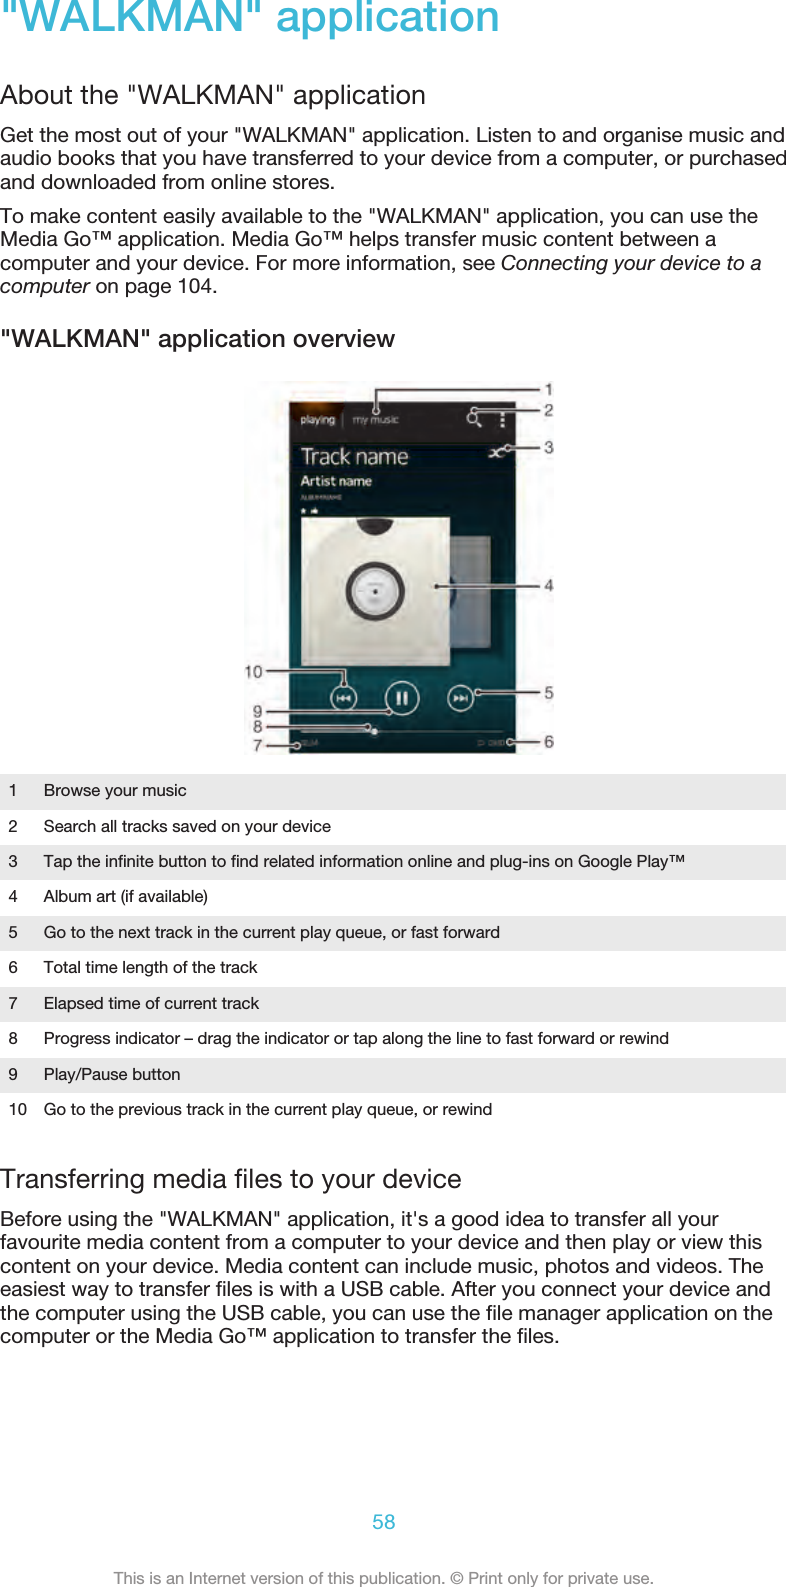 &quot;WALKMAN&quot; applicationAbout the &quot;WALKMAN&quot; applicationGet the most out of your &quot;WALKMAN&quot; application. Listen to and organise music andaudio books that you have transferred to your device from a computer, or purchasedand downloaded from online stores.To make content easily available to the &quot;WALKMAN&quot; application, you can use theMedia Go™ application. Media Go™ helps transfer music content between acomputer and your device. For more information, see Connecting your device to acomputer on page 104.&quot;WALKMAN&quot; application overview1Browse your music2 Search all tracks saved on your device3 Tap the infinite button to find related information online and plug-ins on Google Play™4 Album art (if available)5 Go to the next track in the current play queue, or fast forward6 Total time length of the track7 Elapsed time of current track8 Progress indicator – drag the indicator or tap along the line to fast forward or rewind9 Play/Pause button10 Go to the previous track in the current play queue, or rewindTransferring media files to your deviceBefore using the &quot;WALKMAN&quot; application, it&apos;s a good idea to transfer all yourfavourite media content from a computer to your device and then play or view thiscontent on your device. Media content can include music, photos and videos. Theeasiest way to transfer files is with a USB cable. After you connect your device andthe computer using the USB cable, you can use the file manager application on thecomputer or the Media Go™ application to transfer the files.58This is an Internet version of this publication. © Print only for private use.